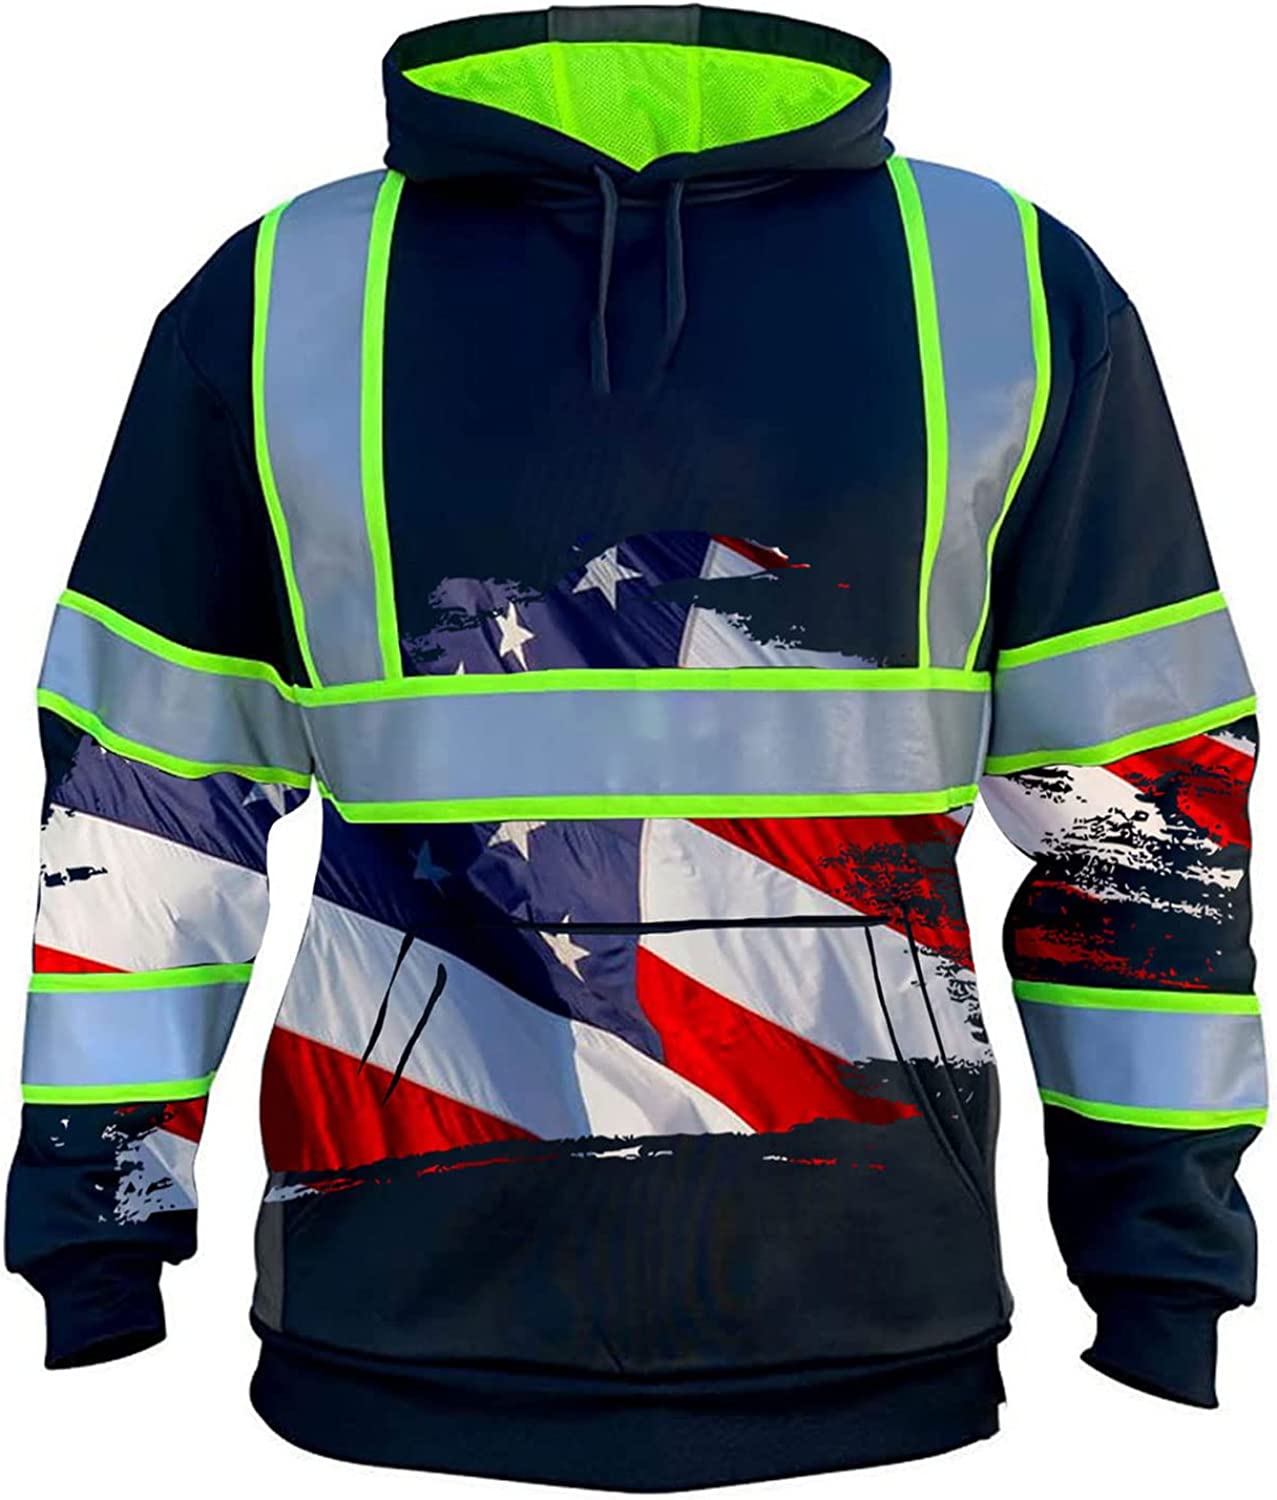 Customizable Trucker Shirts with 3D Printing: Perfect Gift for Trucker Enthusiasts! Choose from Hawaiian Shirts, Sweatshirts, Hoodies, and More in Multicolor Over Printing. – JOT1446